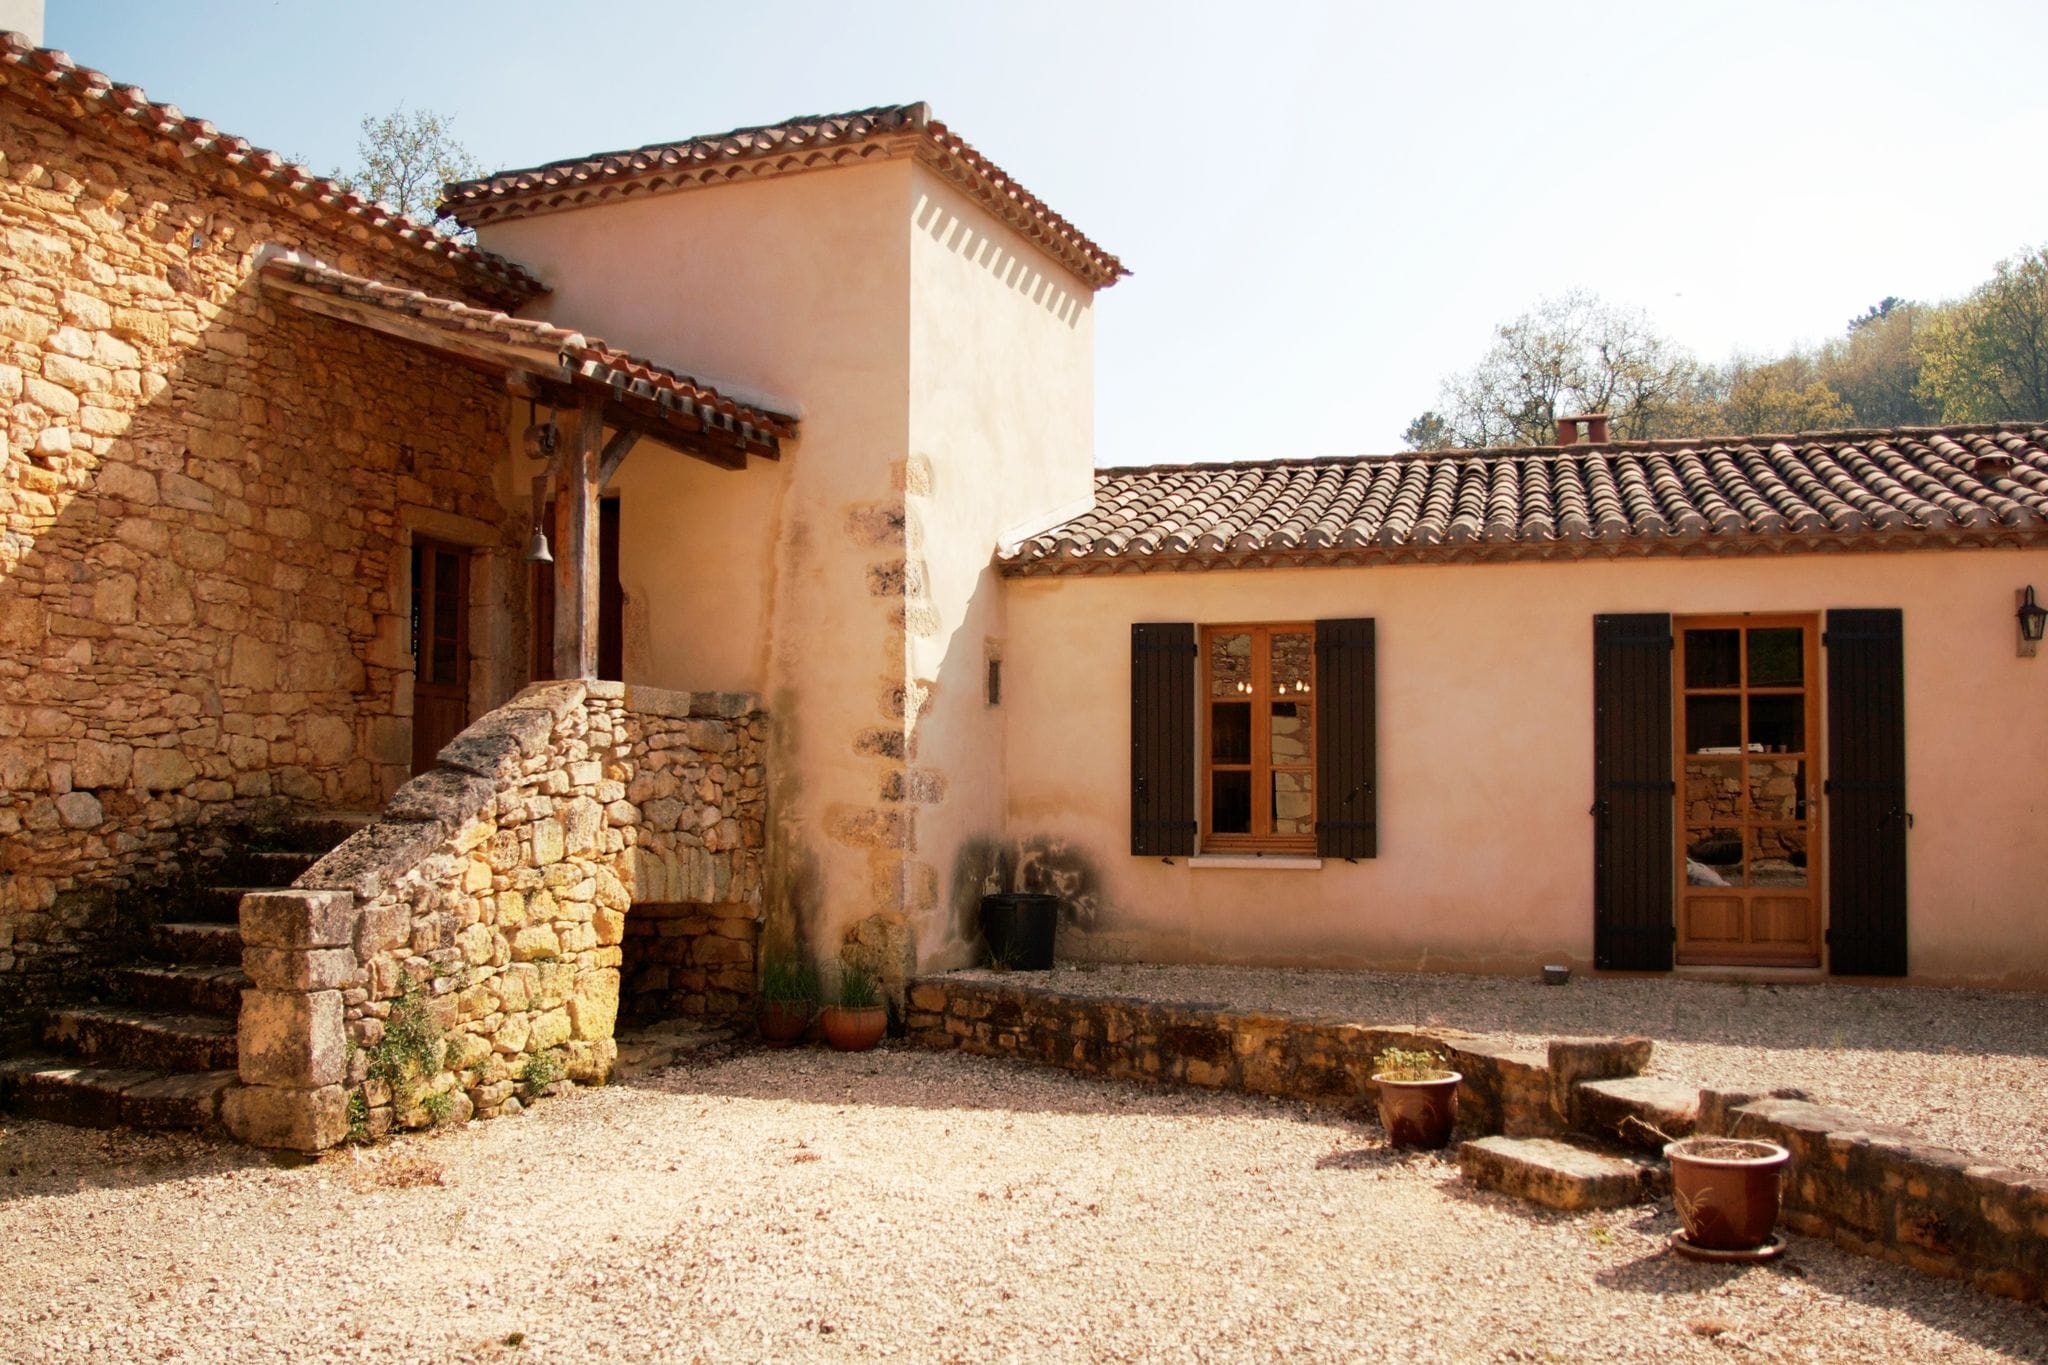 Charming Holiday home in Fumel France with Private Pool